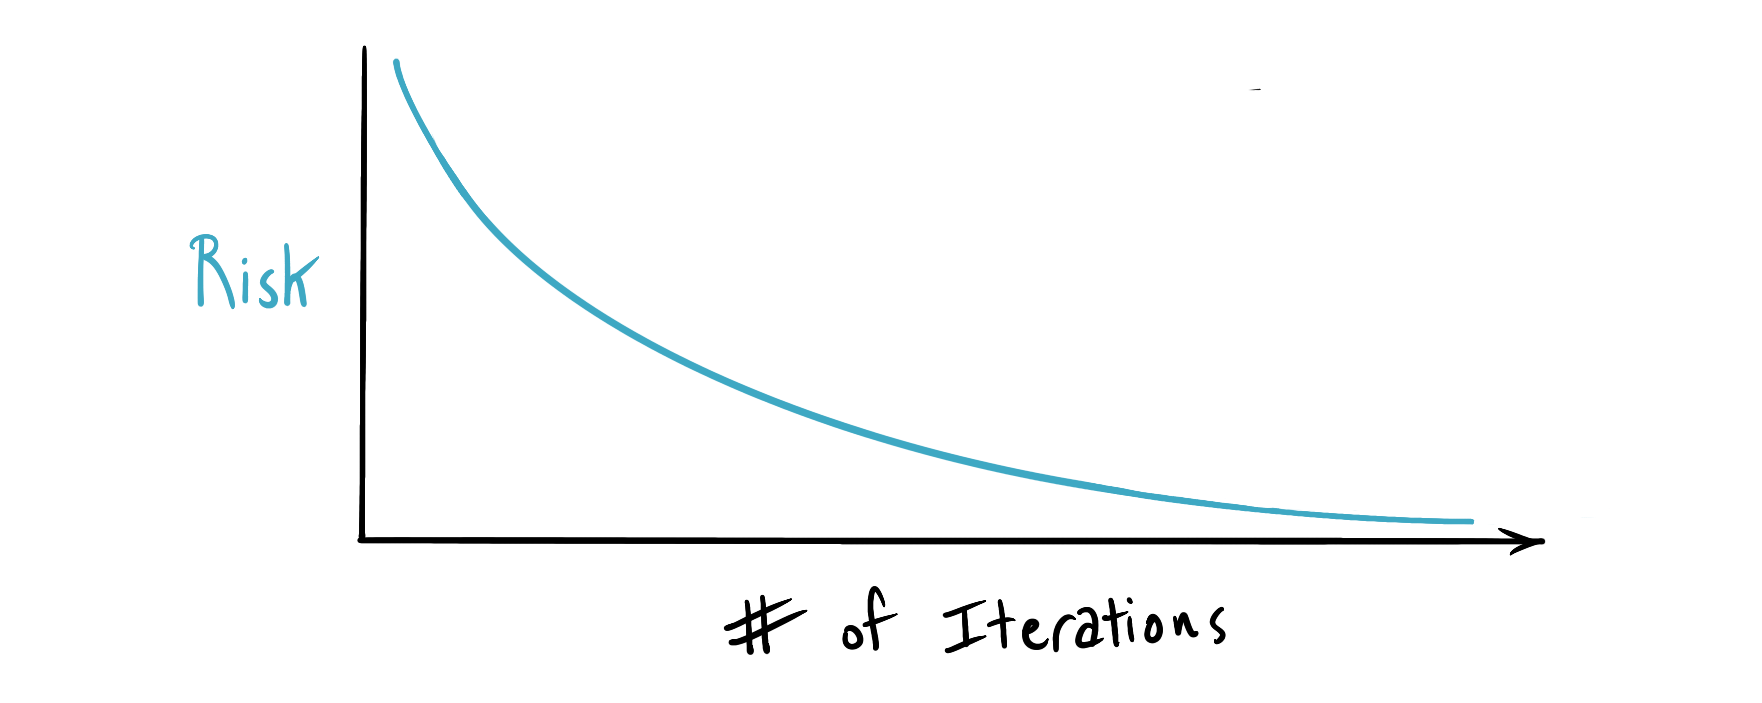 Relationship between risks and design iterations